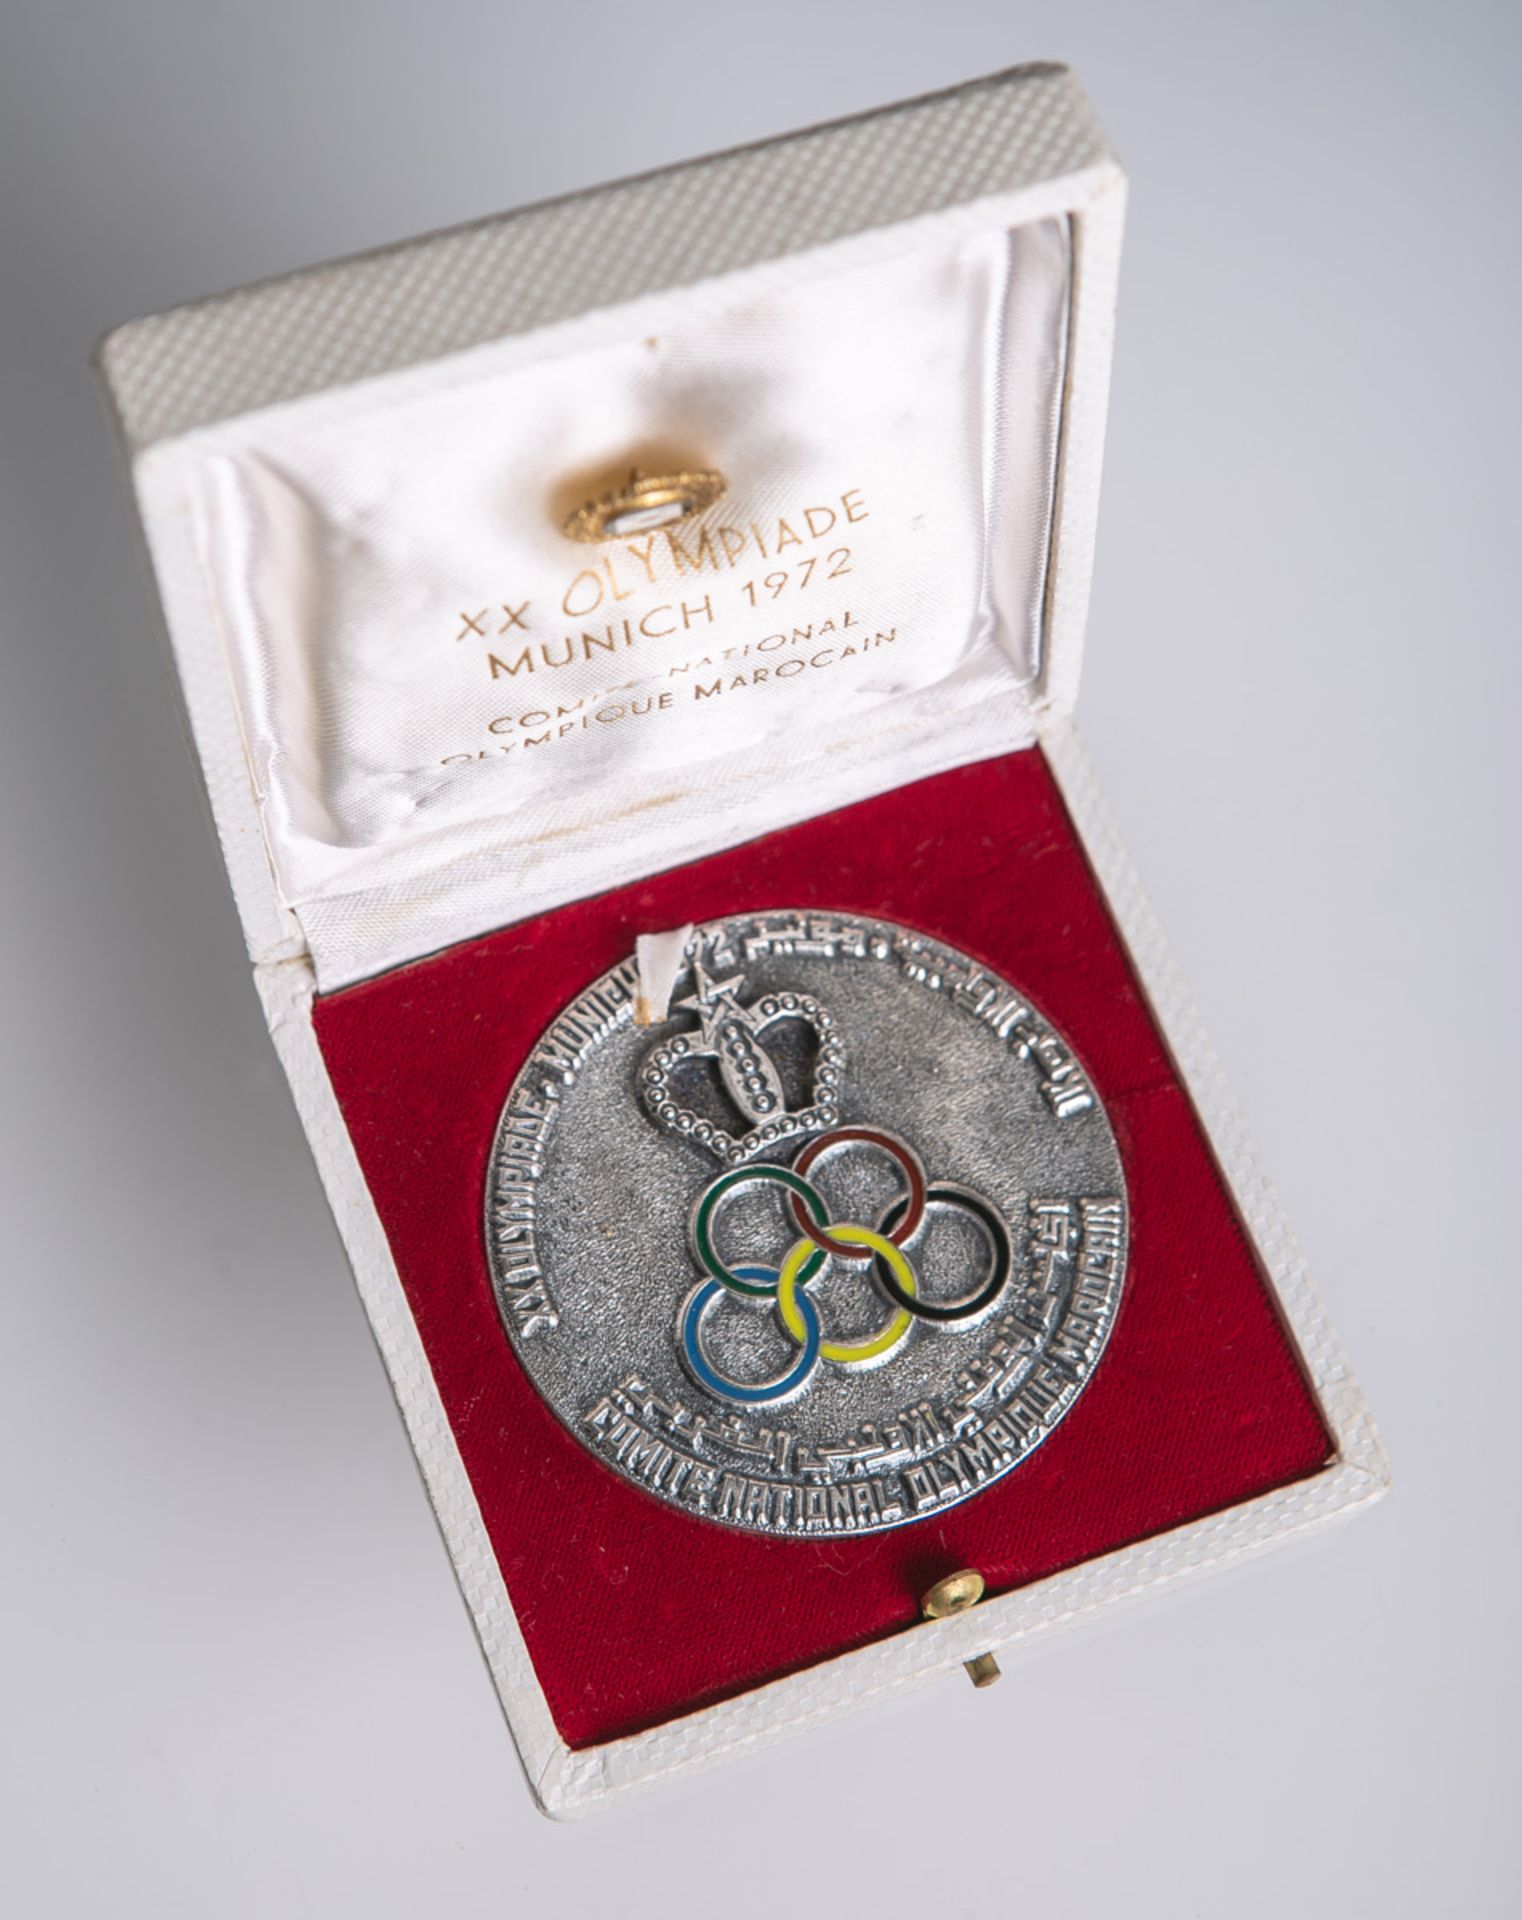 Medaille "XX Olympiade Munich 1972-Comite National Olympique Marocain"